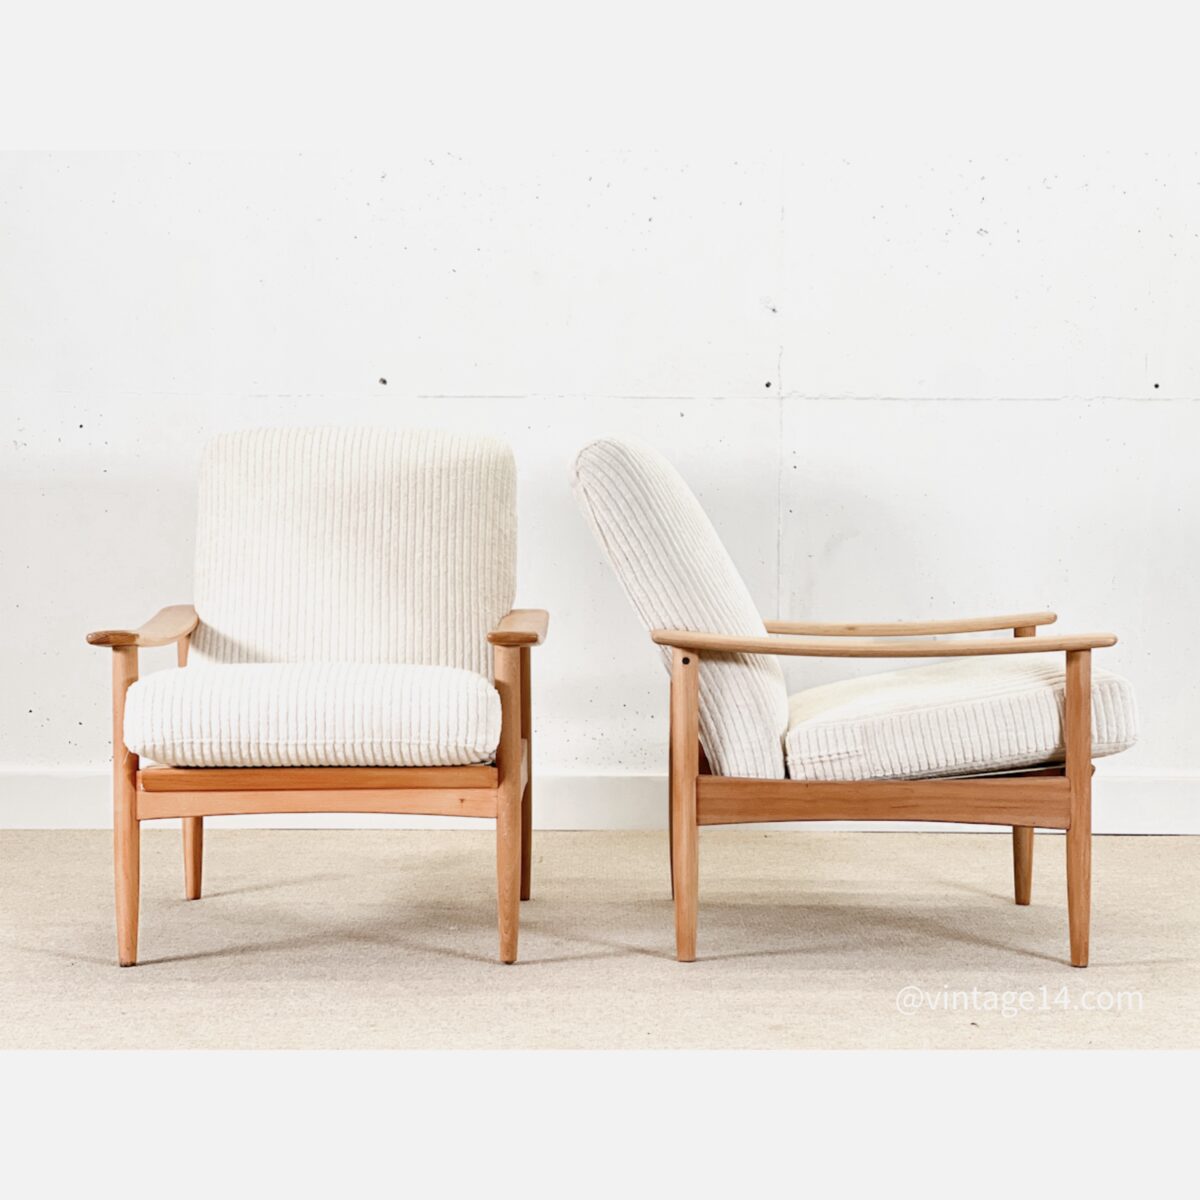 A pair of Lounge armchairs (Guy Rogers)